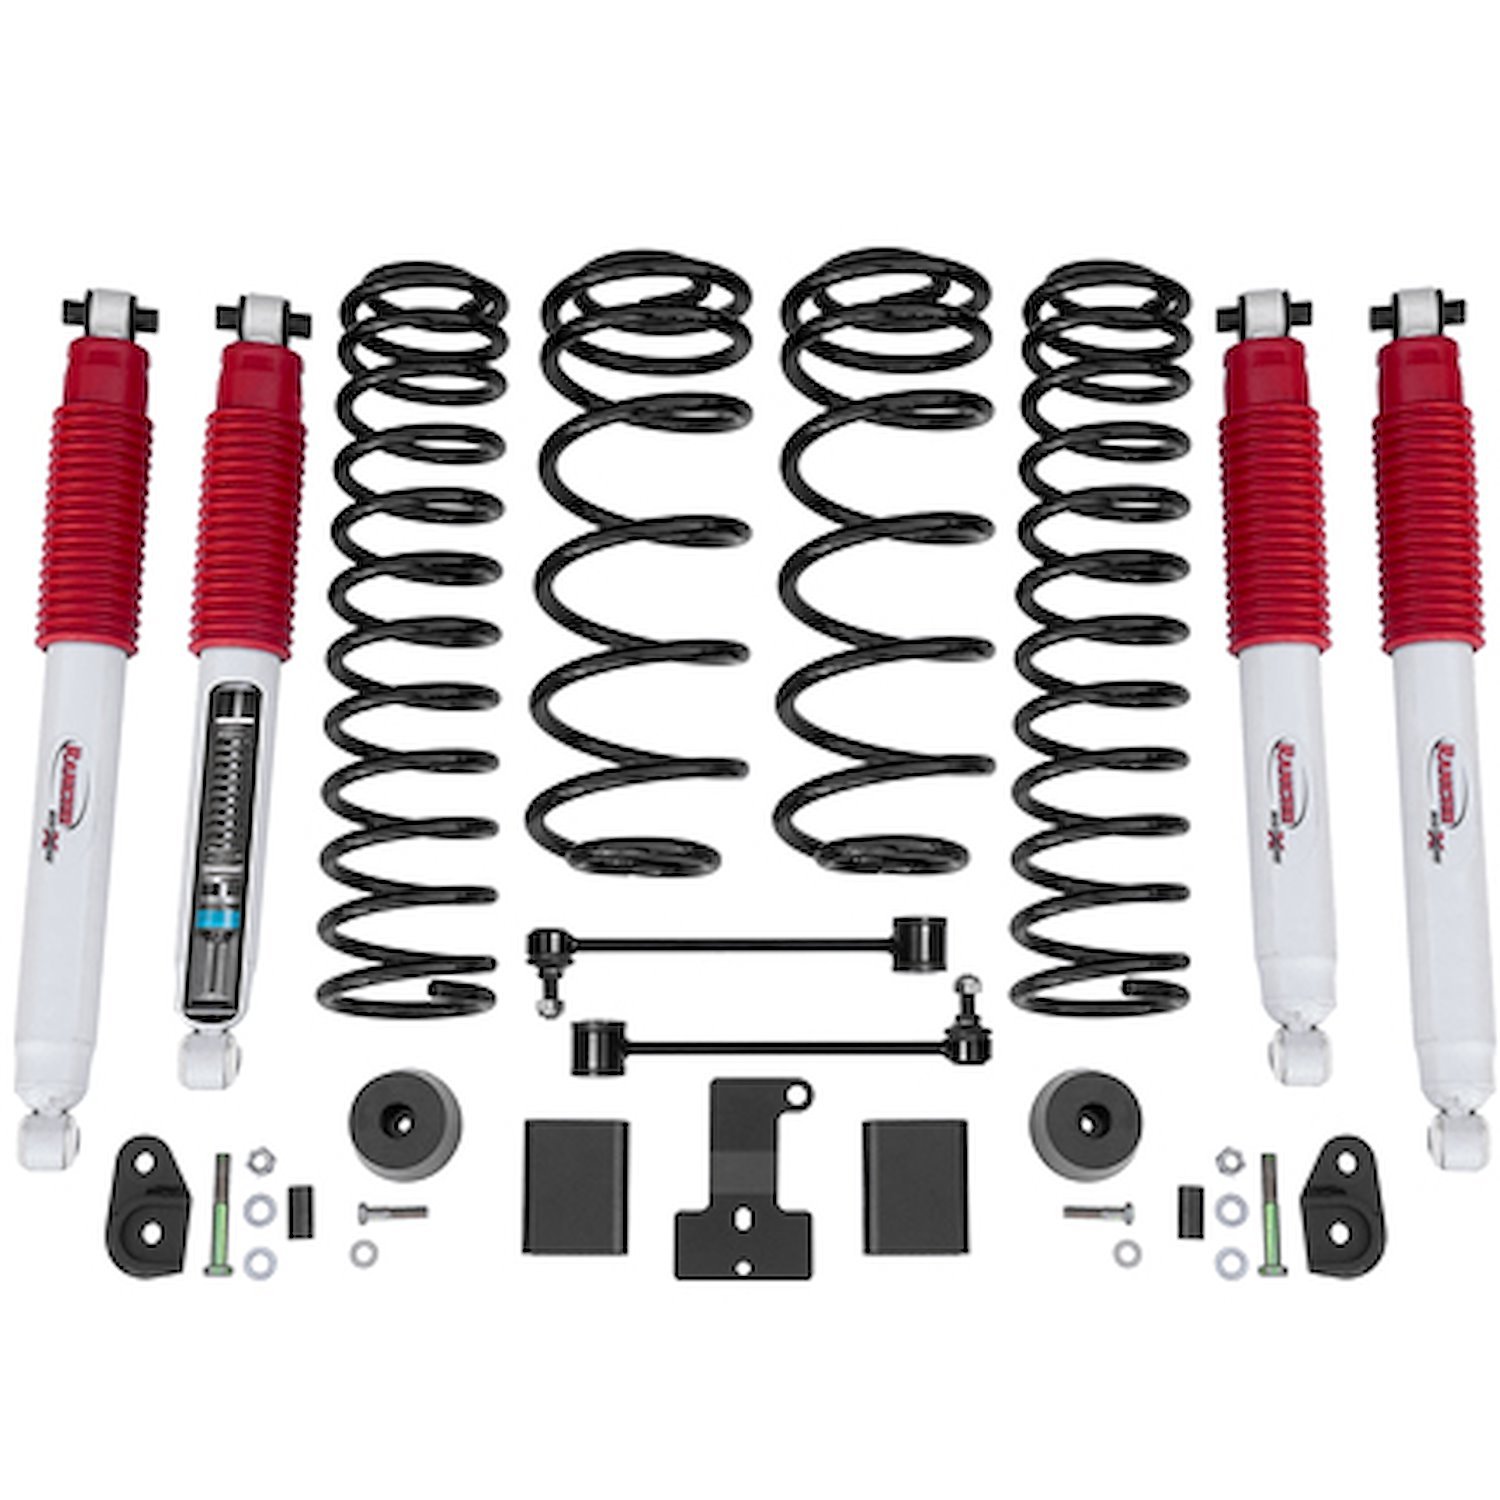 3.5 in. Sport Suspension Lift Kit for Non-Rubicon 2018-Up Jeep Wrangler JL Unlimited